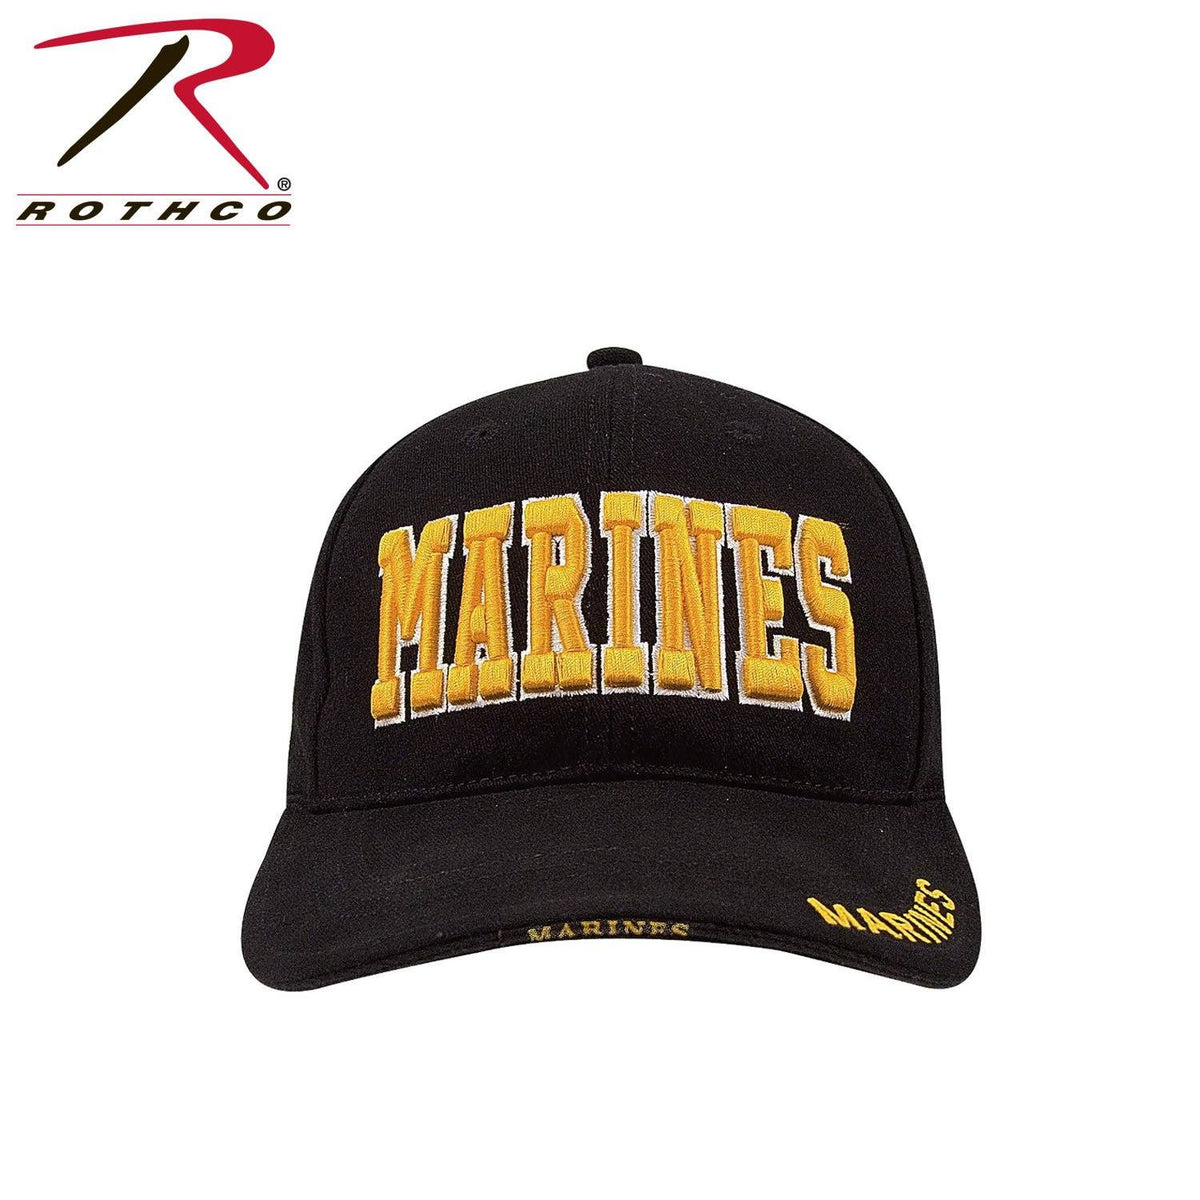 Deluxe Marines Gold & Black Hat - Marine Corps Direct